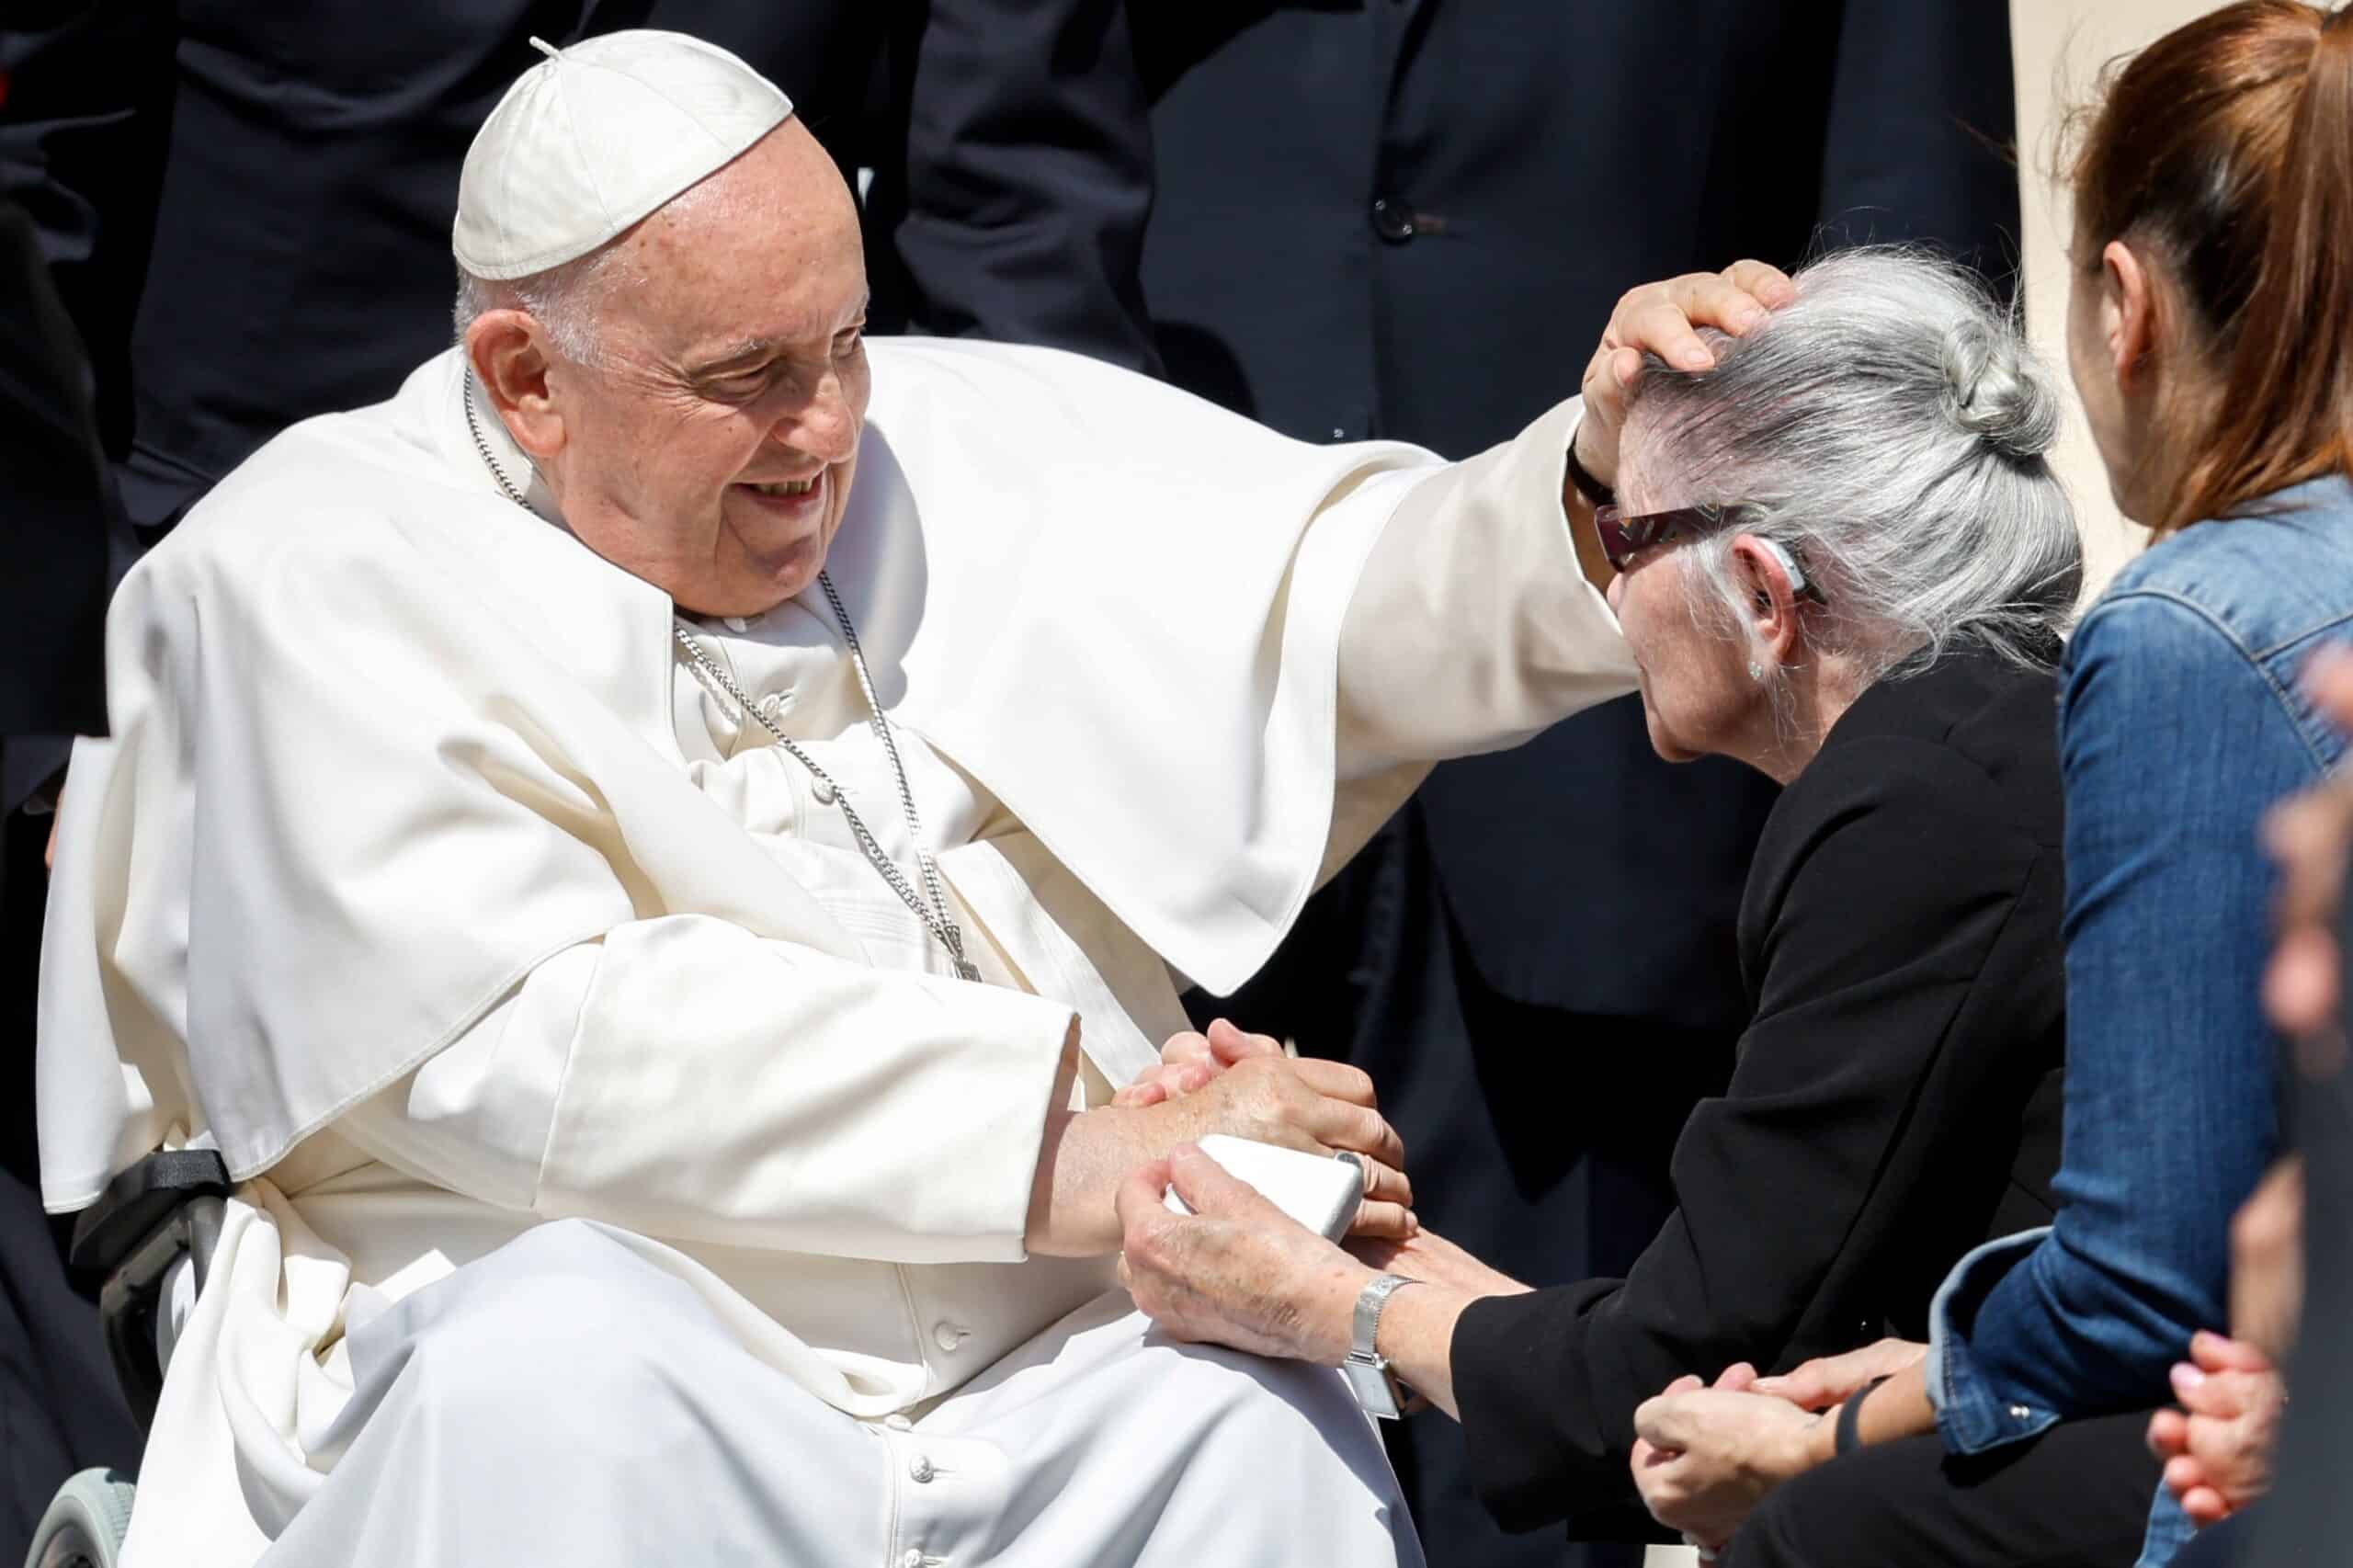 Pope Francis greets an elderly woman in the vatican